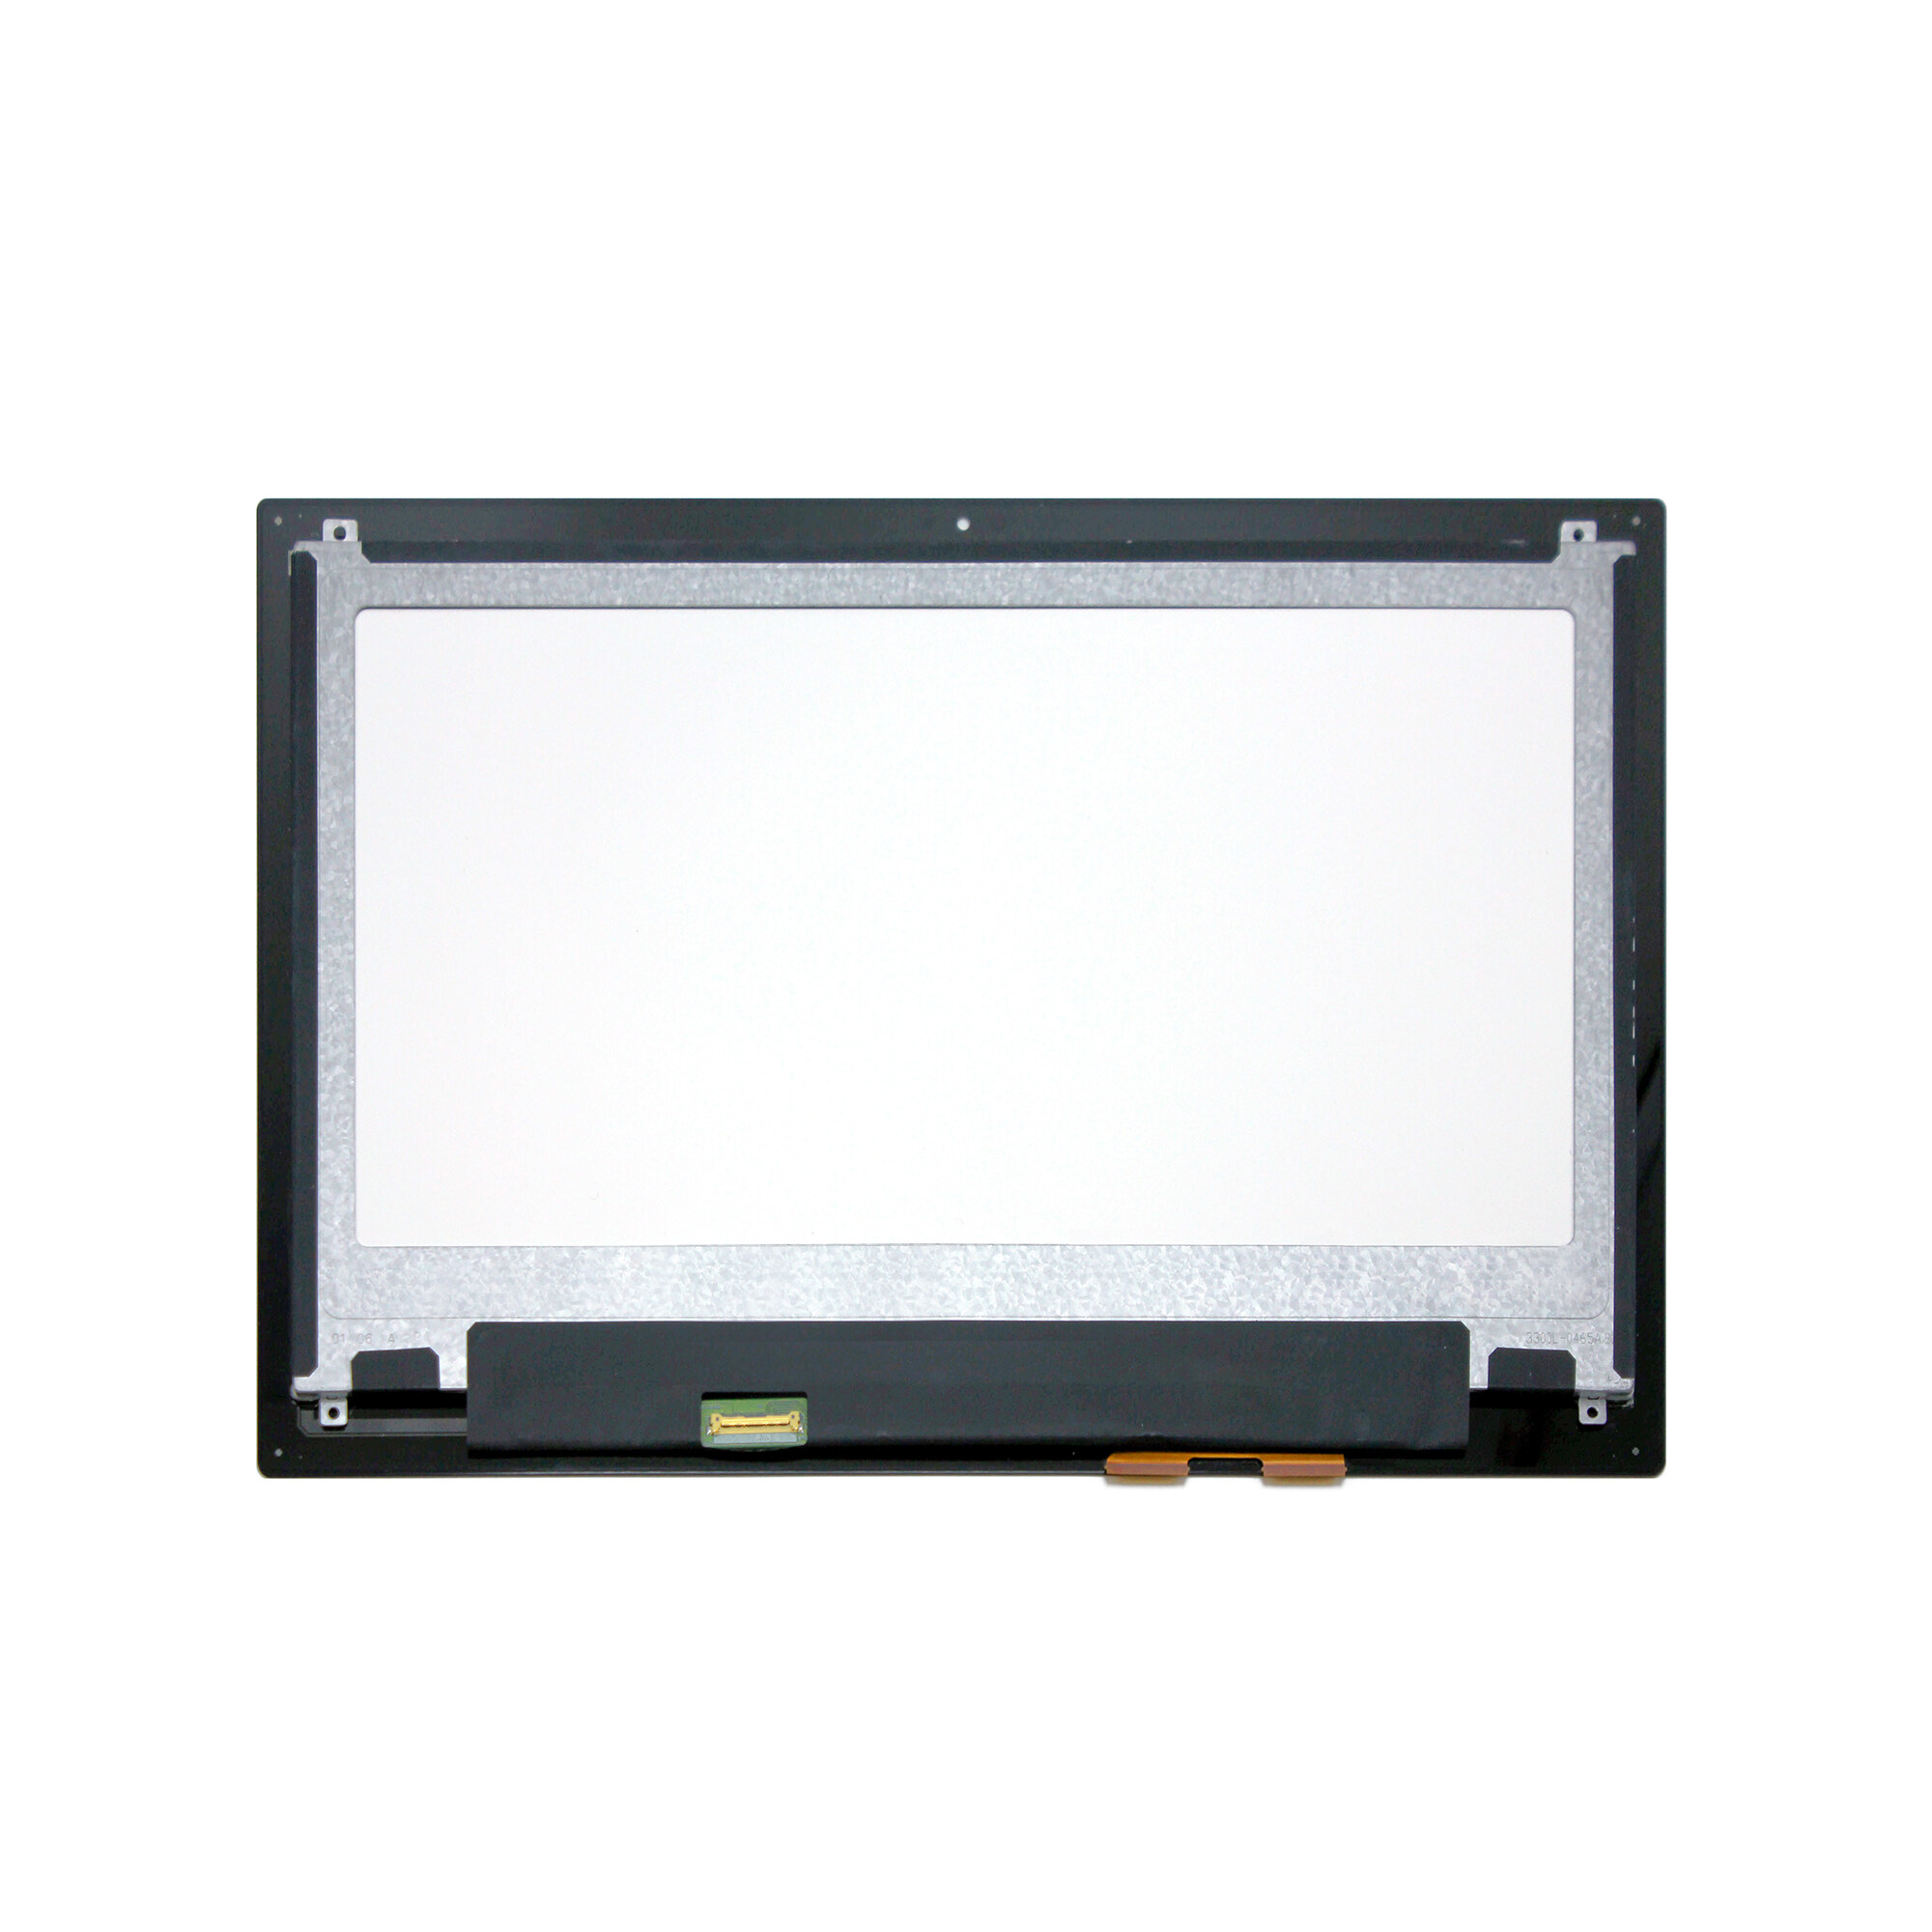 13.3" LCD Touch Screen Display Assembly for Dell Inspiron 13 7347+Bezel 1366x768